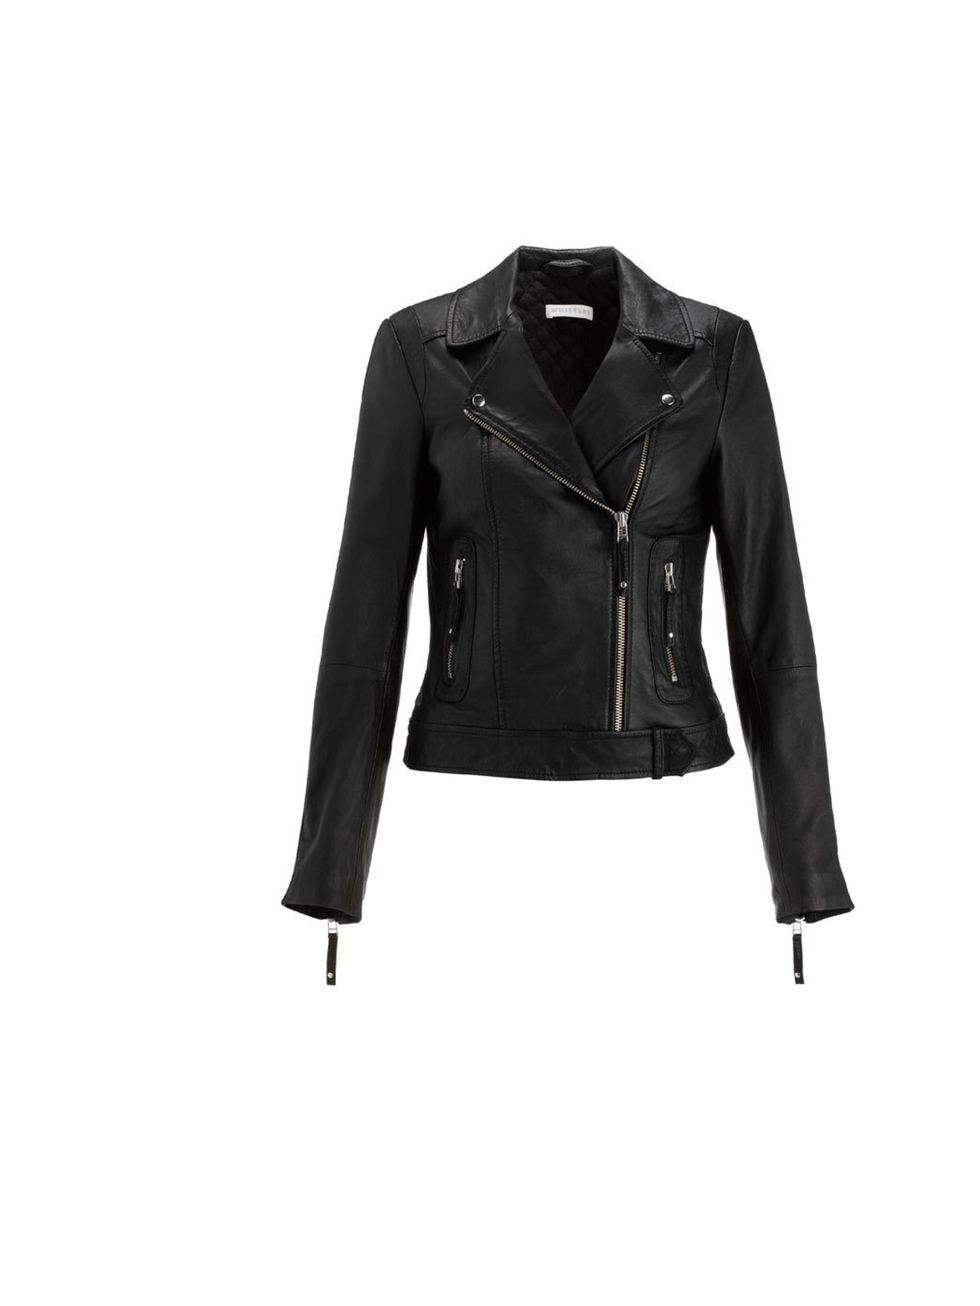 <p><a href="http://www.whistles.co.uk/fcp/categorylist/dept/shop?resetFilters=true">Whistles</a> 'Dree' leather biker jacket, £295</p>